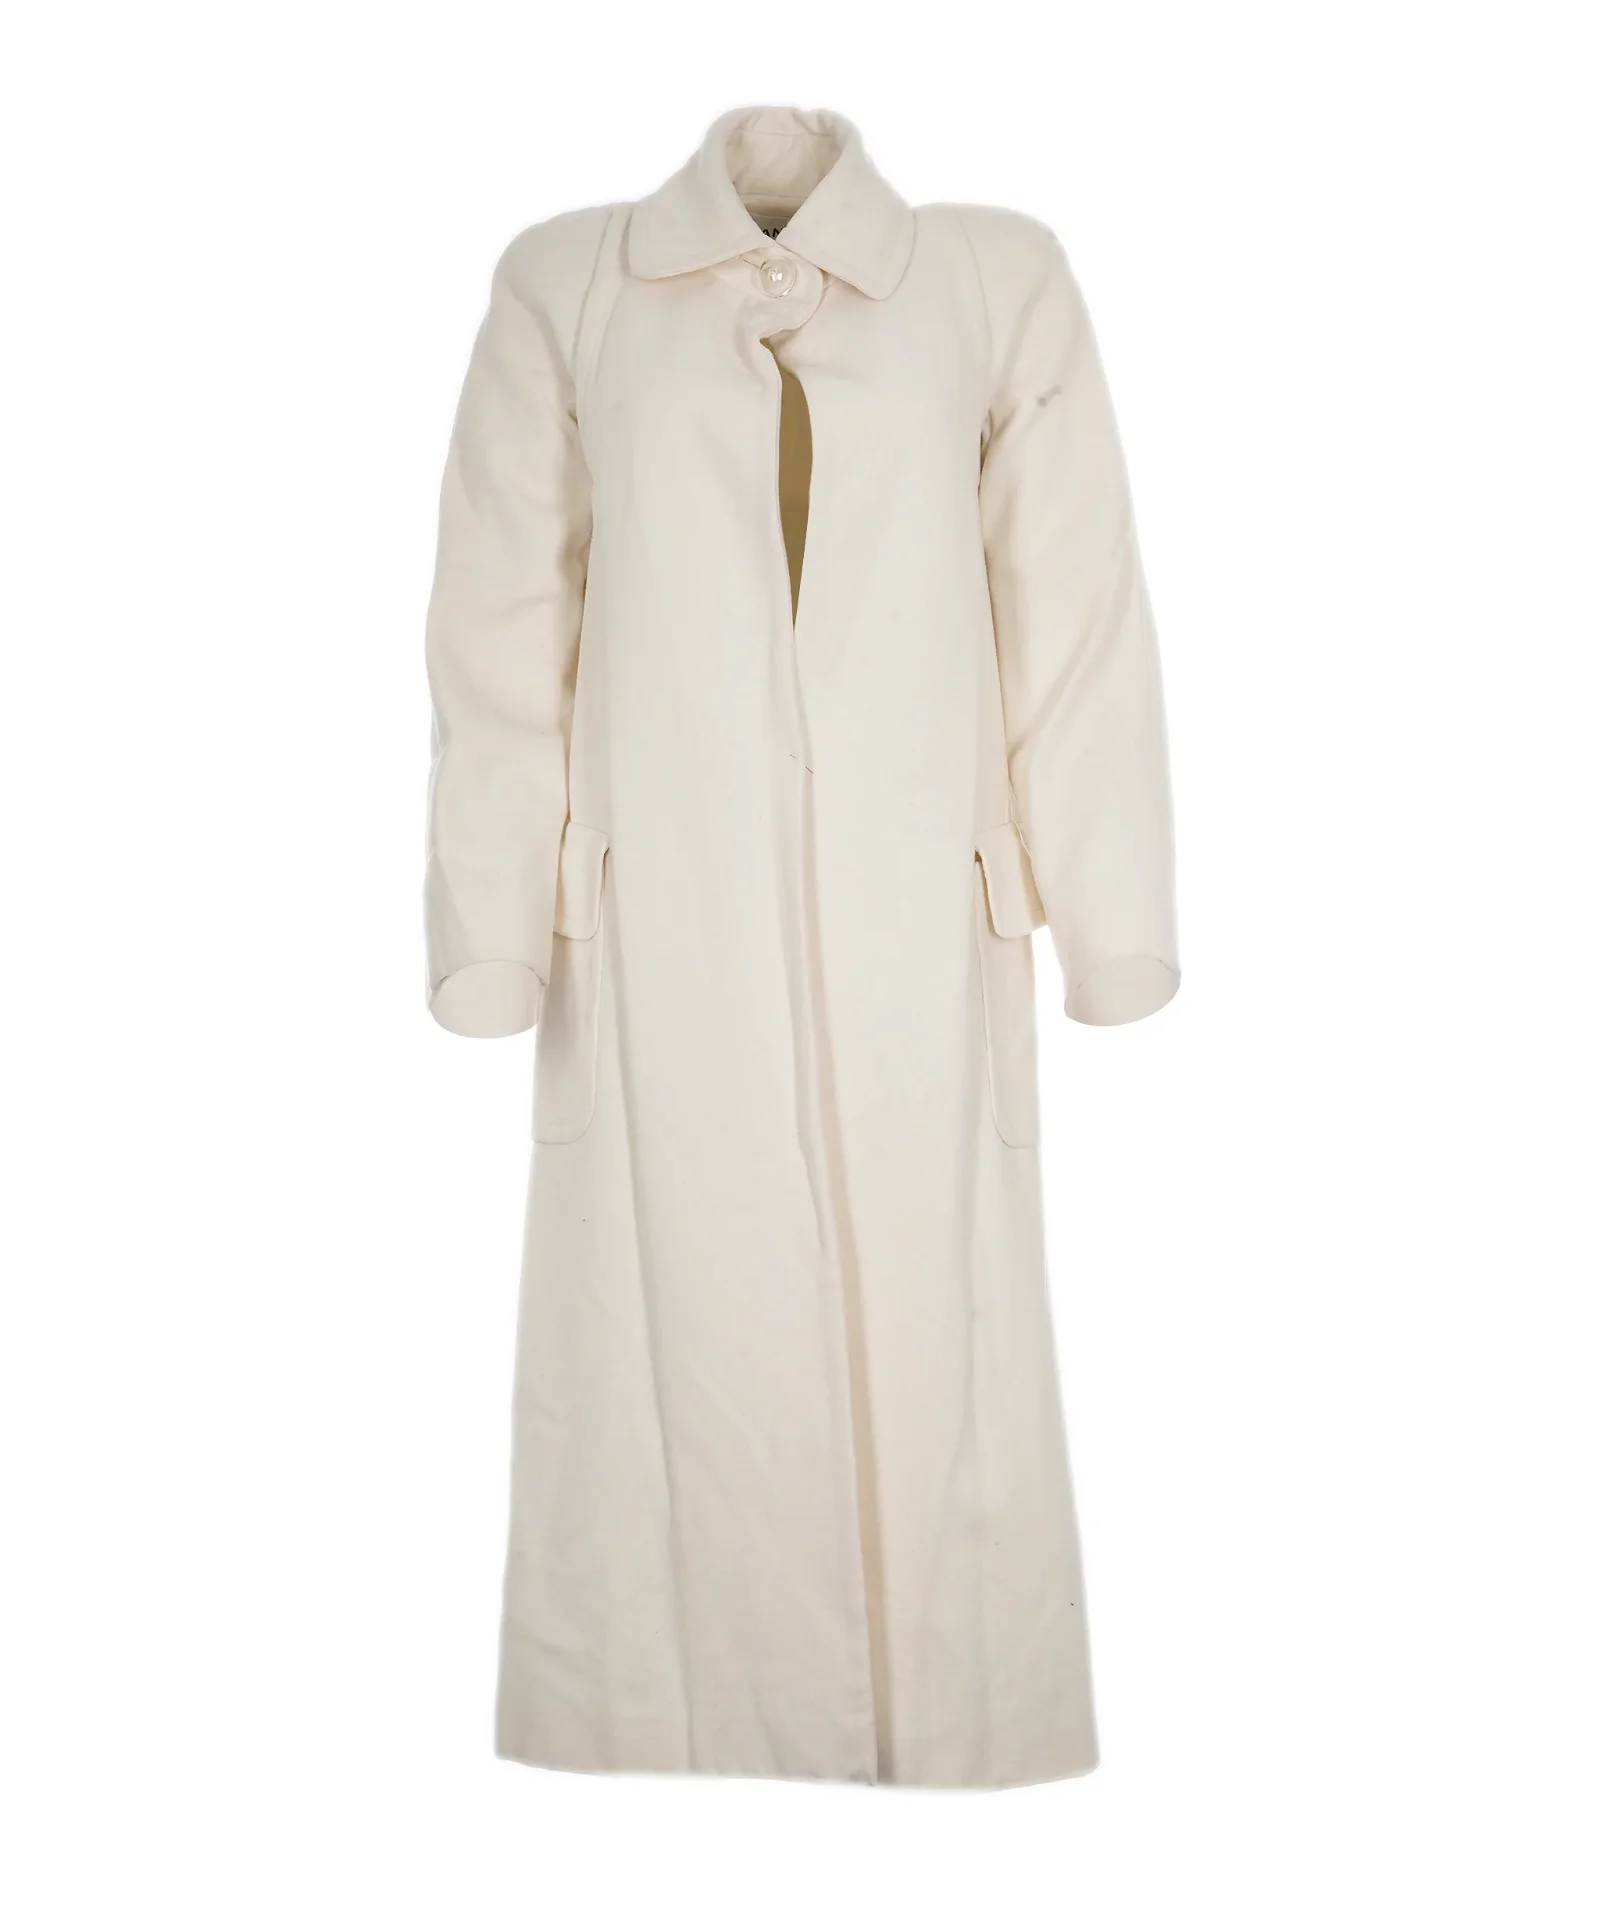 Image of Chanel white pearl button long coat AVC1940